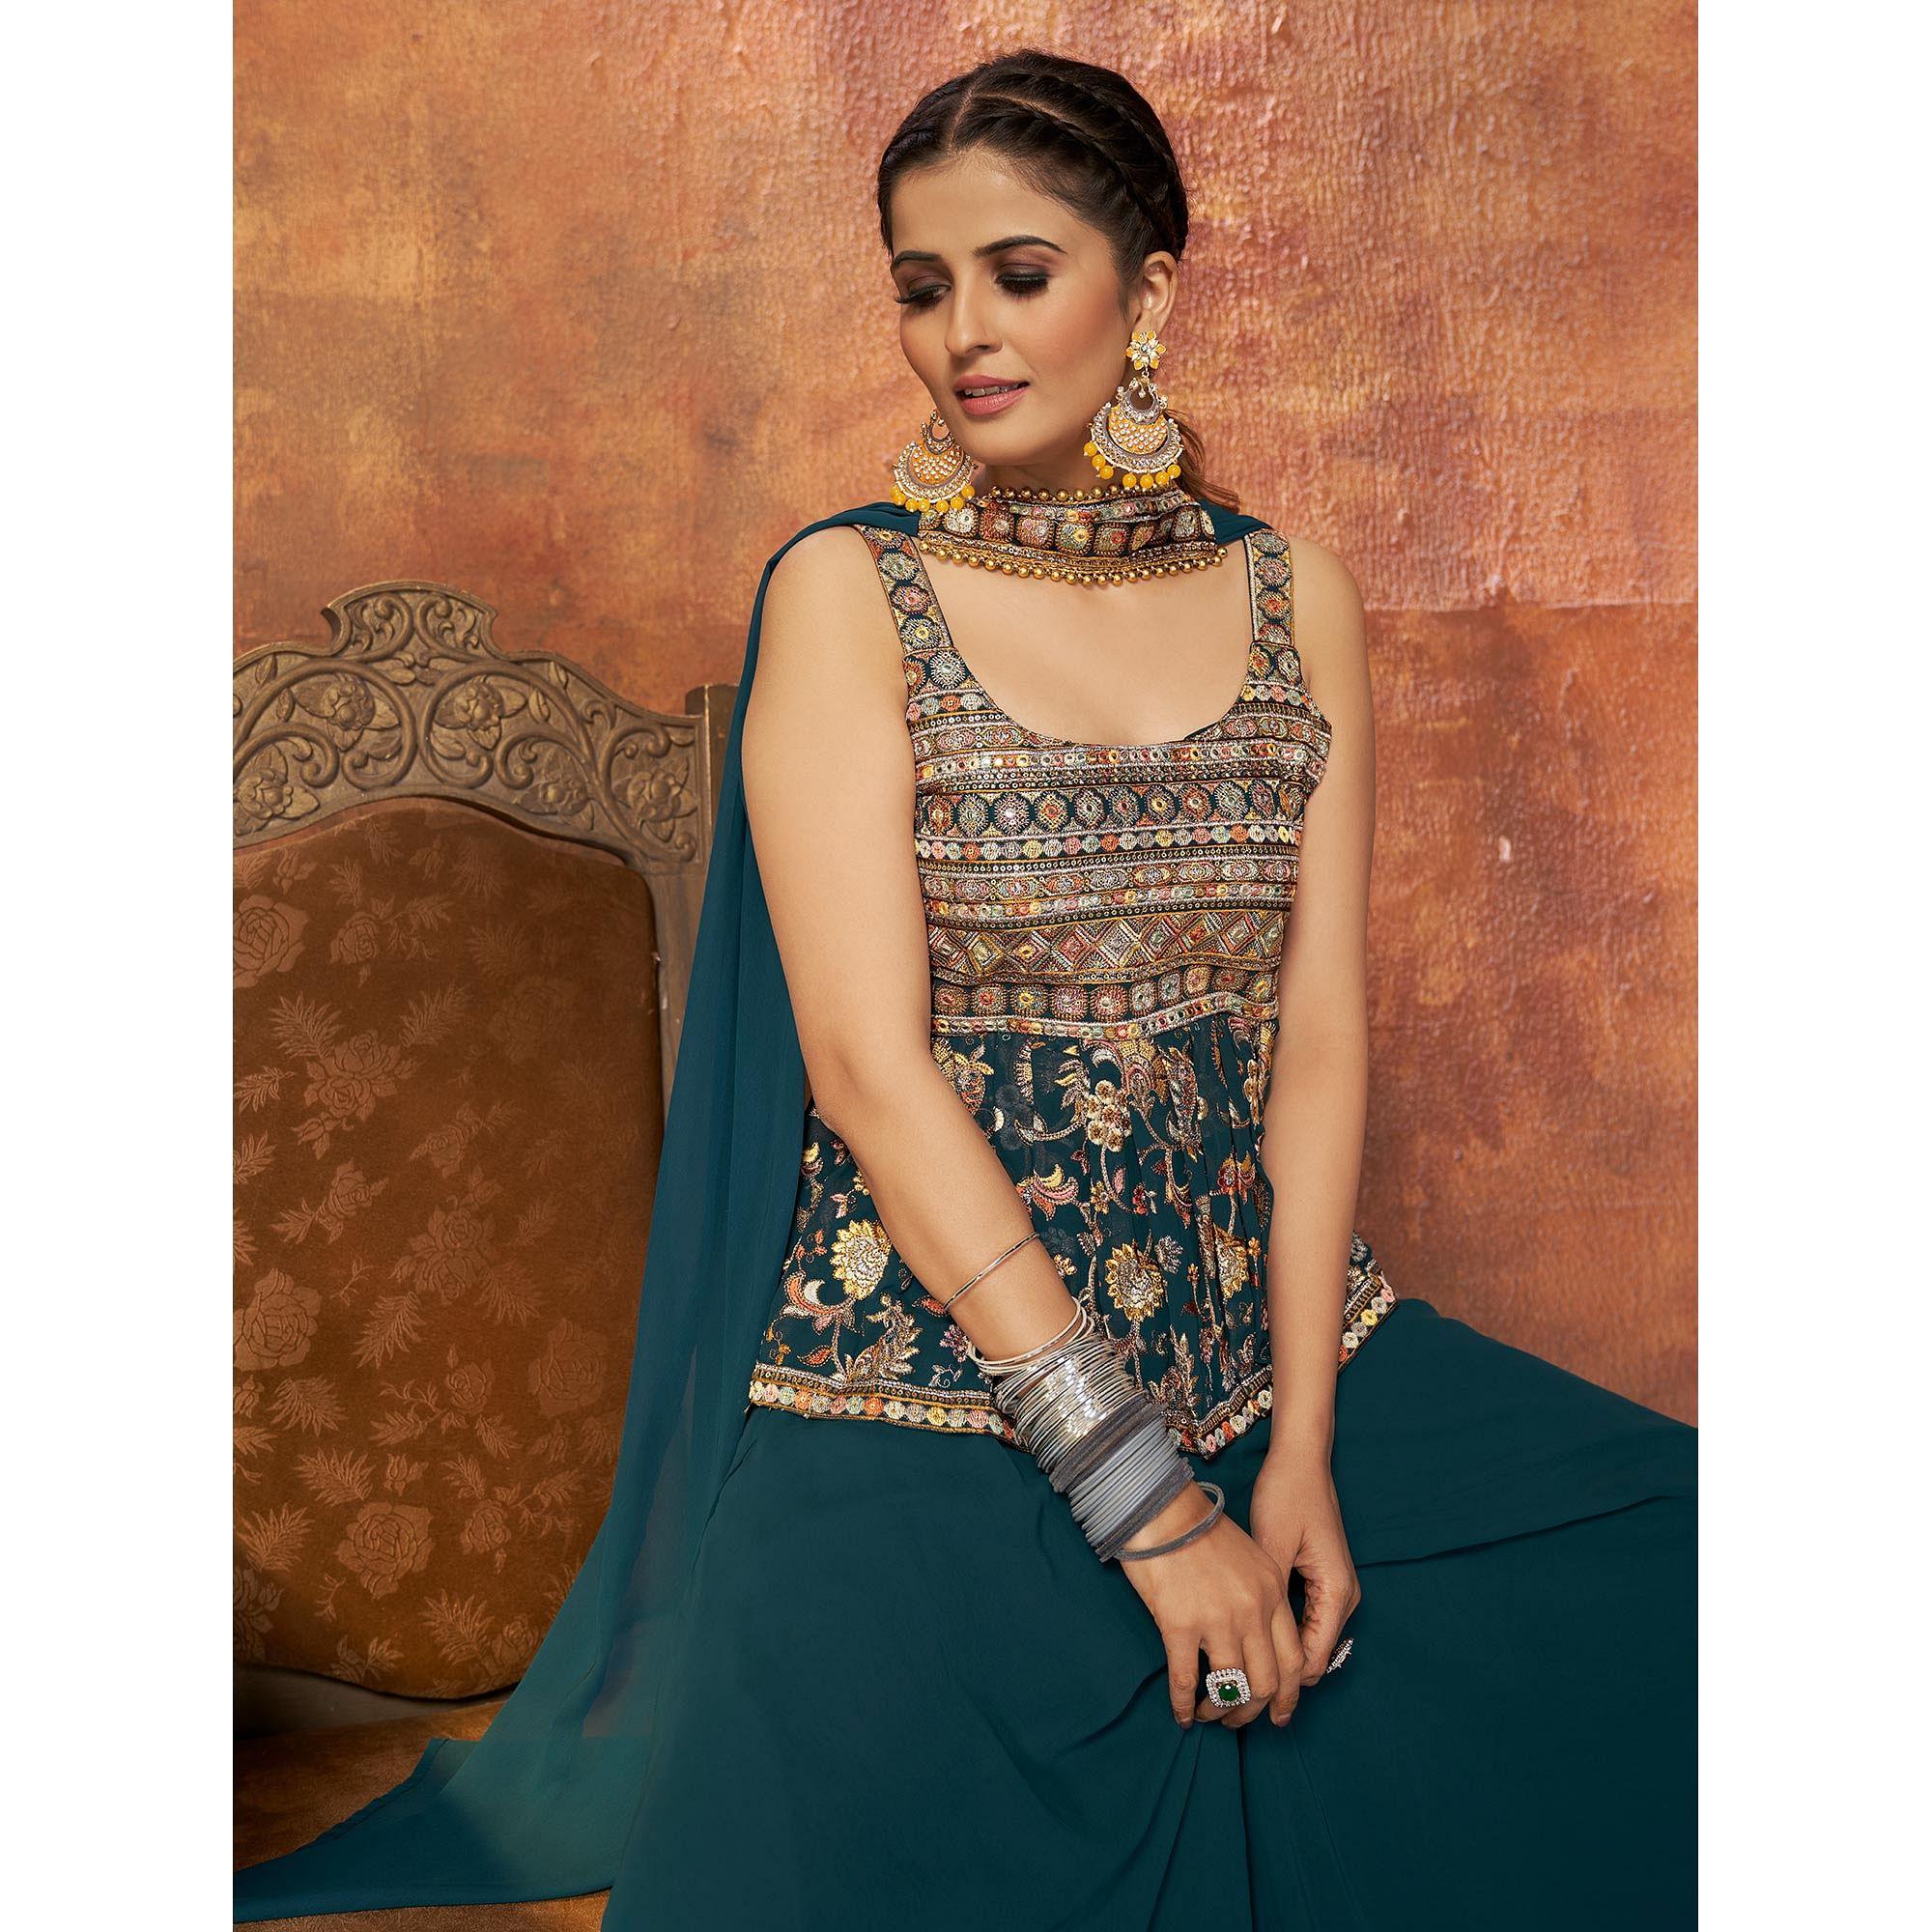 Teal Blue Embroiddered Georgette Sharara Suit - Peachmode